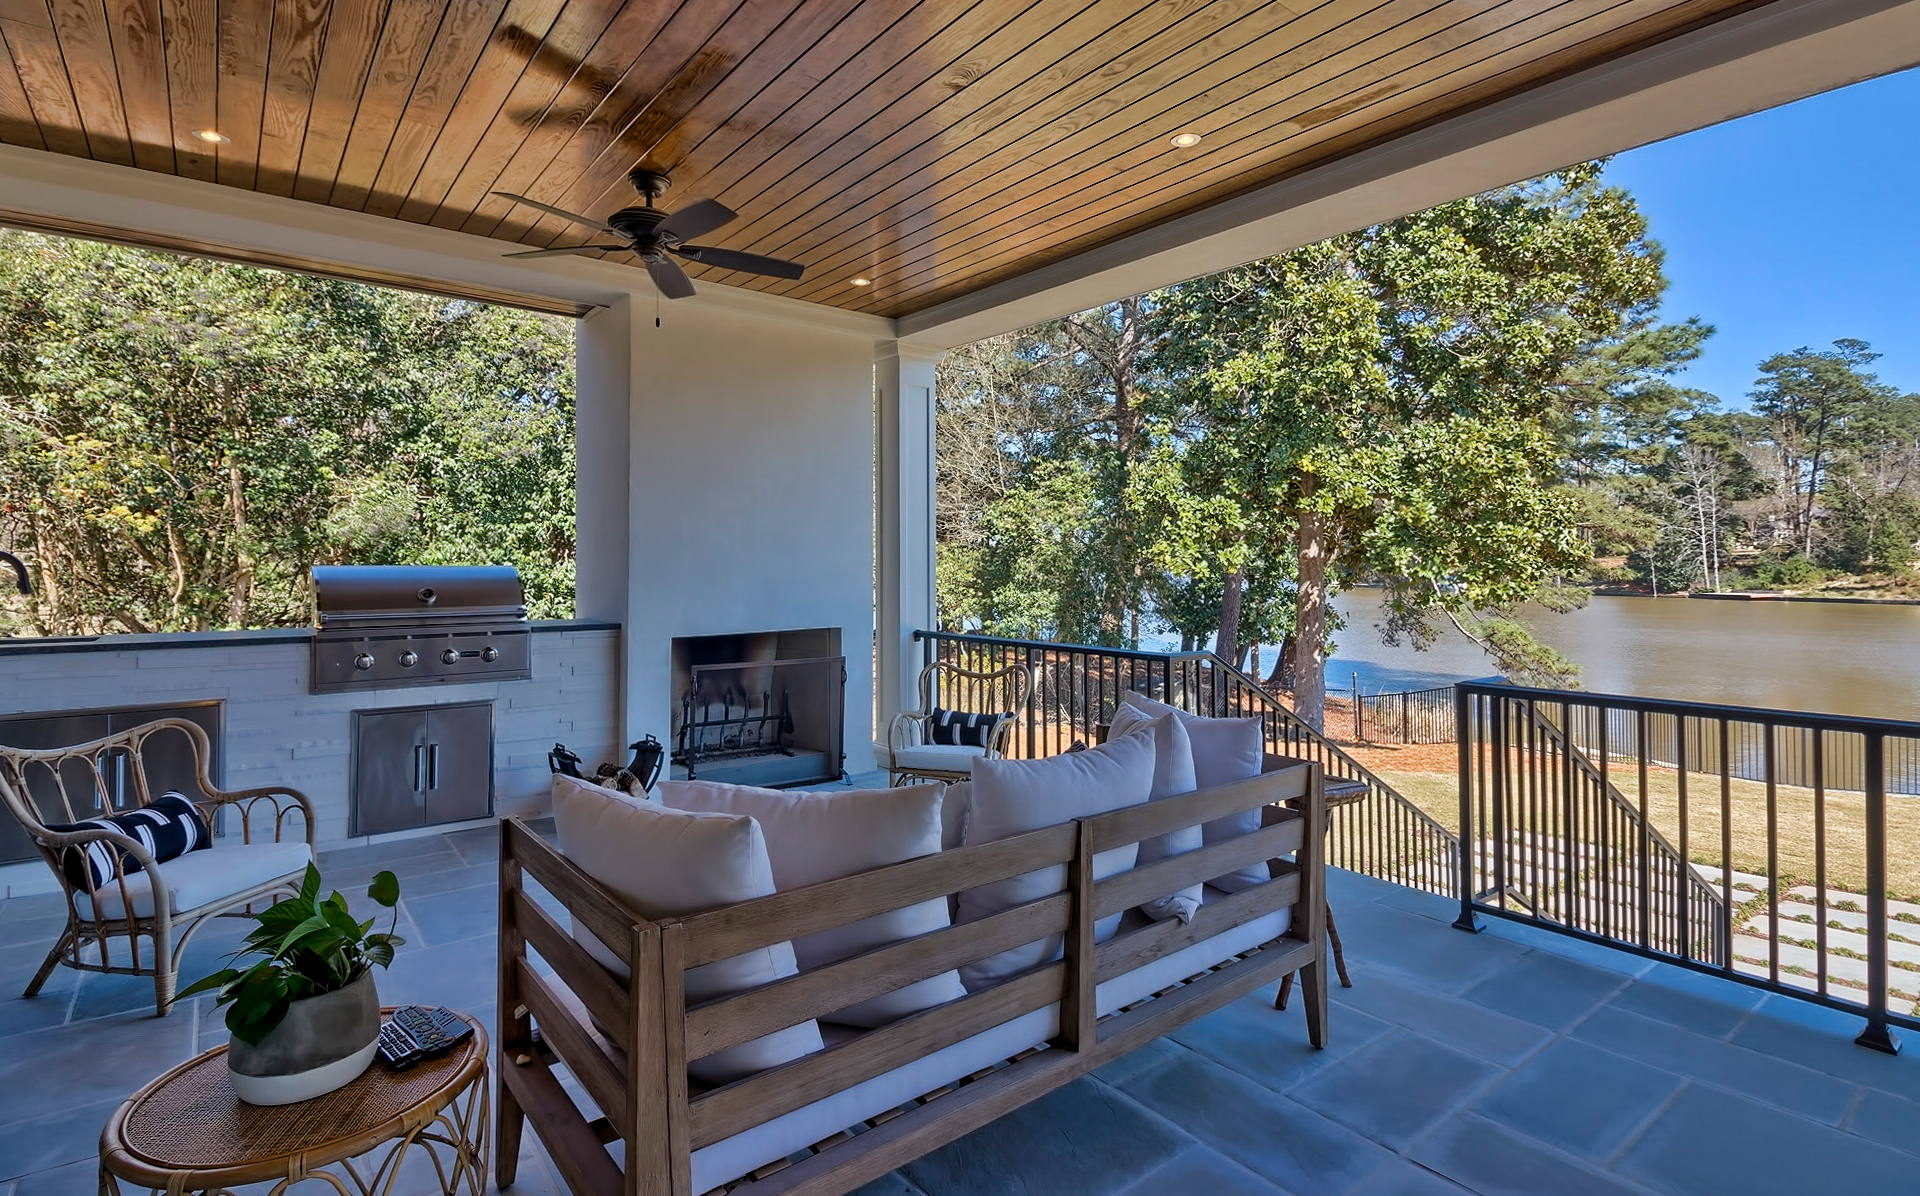 LaFaye Custom Home Builders' Outdoor Living at its Finest